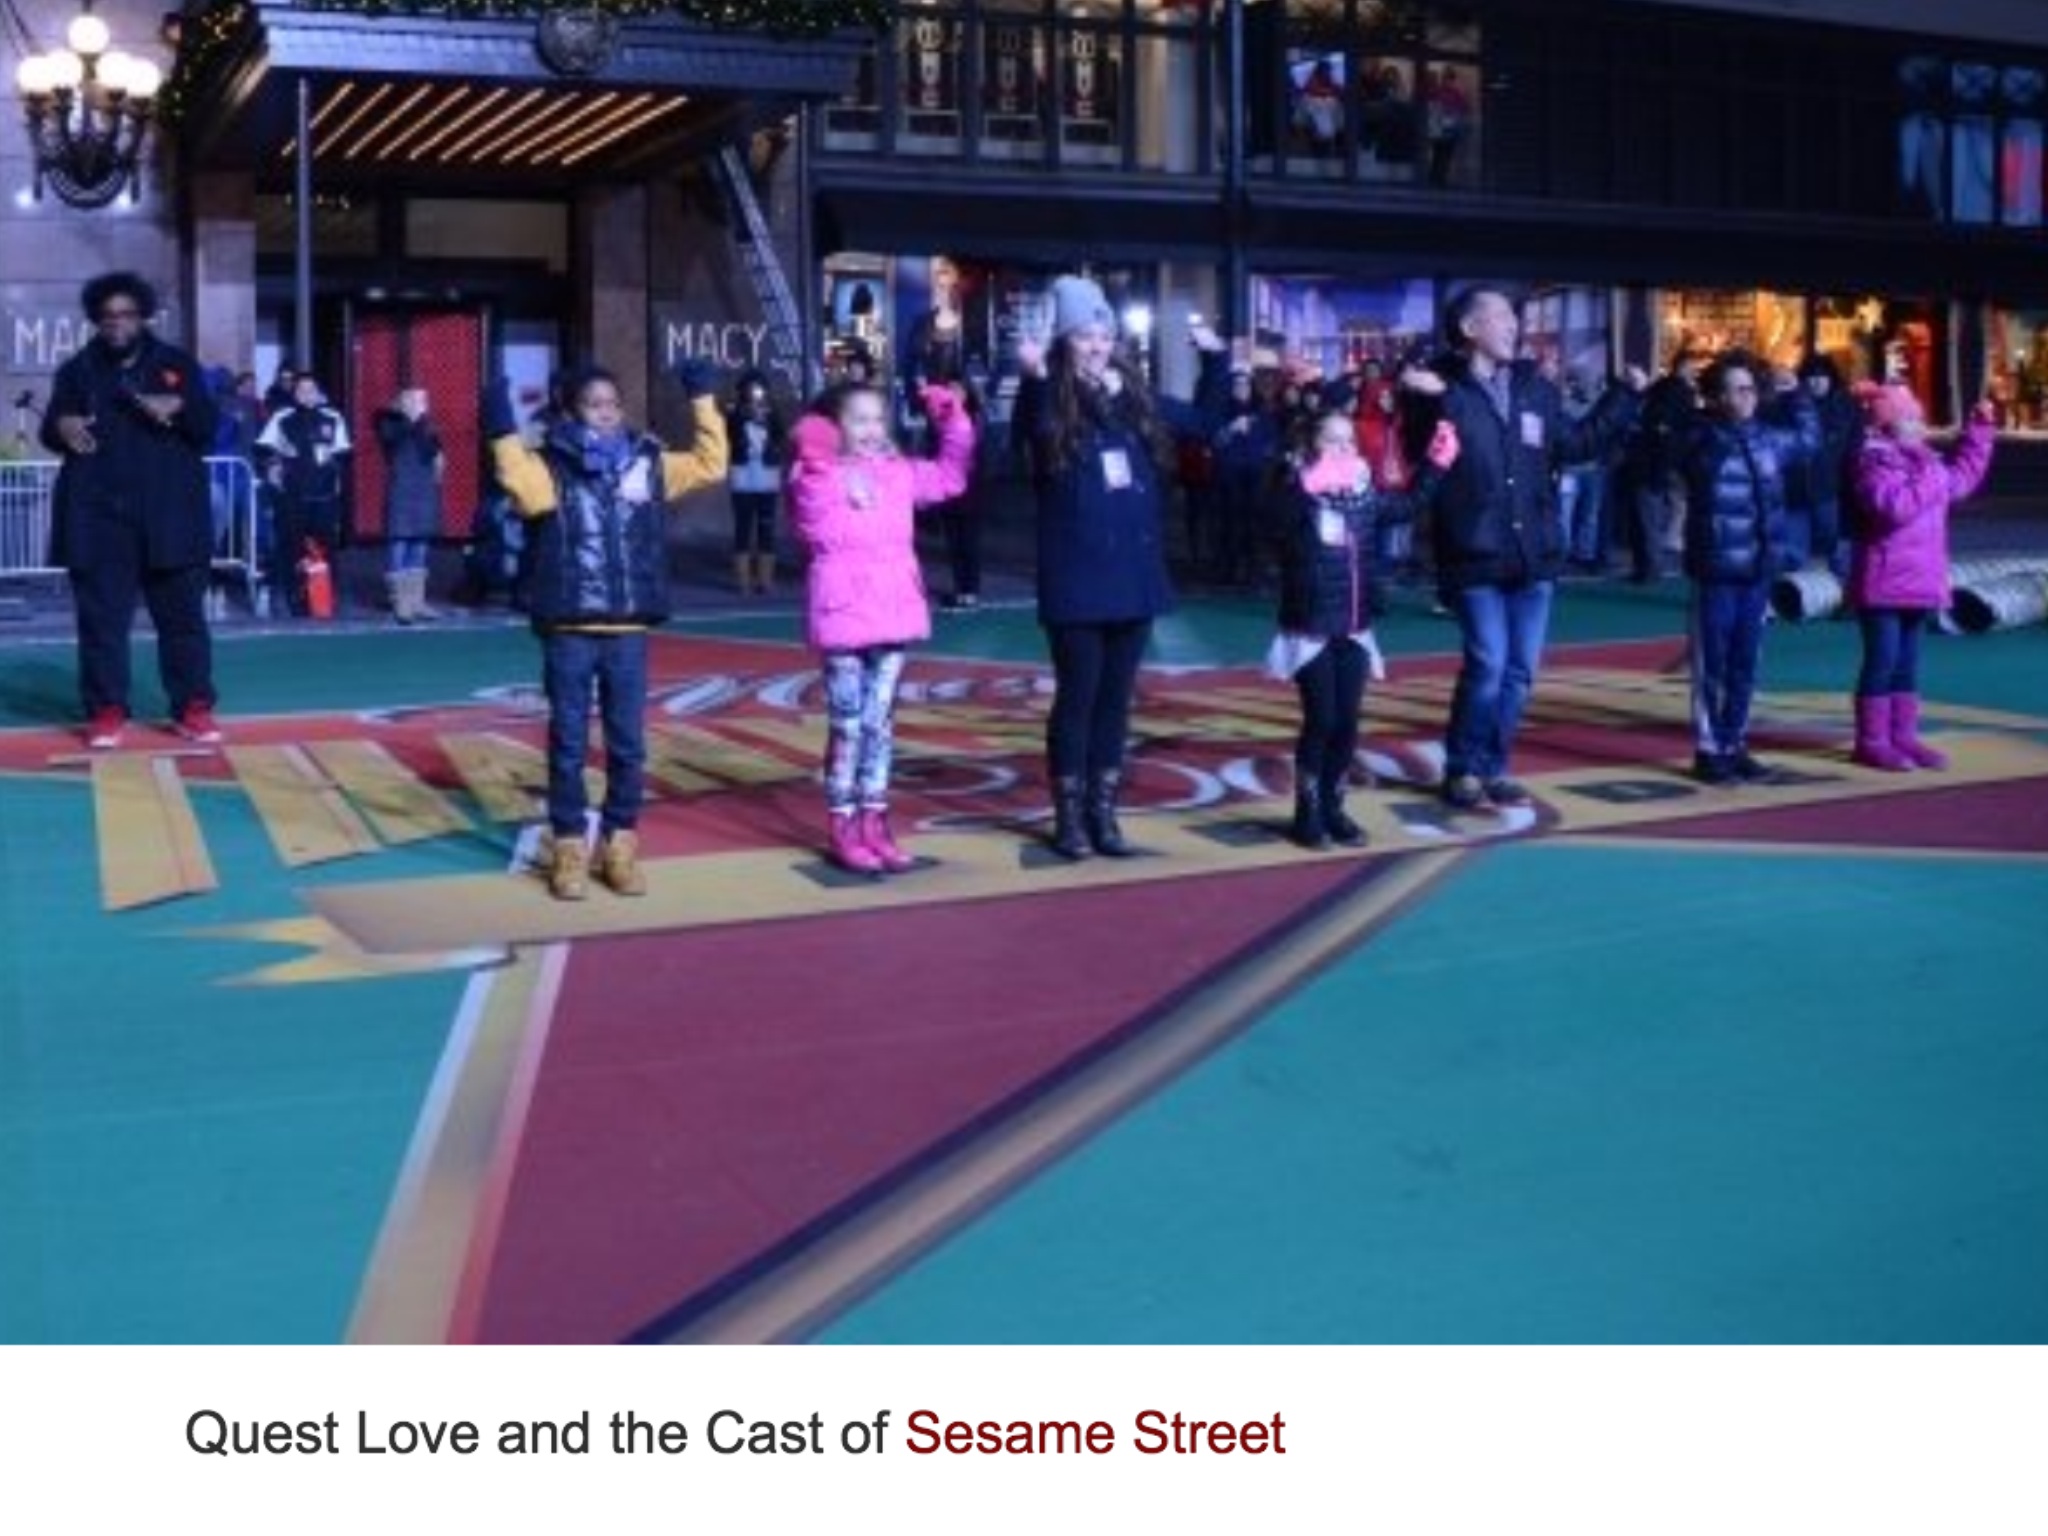 RAINA CHENG (Far right) at the 89th Macy's Thanksgiving Day Parade Rehearsal with Sesame Street cast members Alan Muraoka & Suki Lopez; Questlove & fellow child performers, 11/23/2015. Raina performed on the Sesame Street Float in the previous year